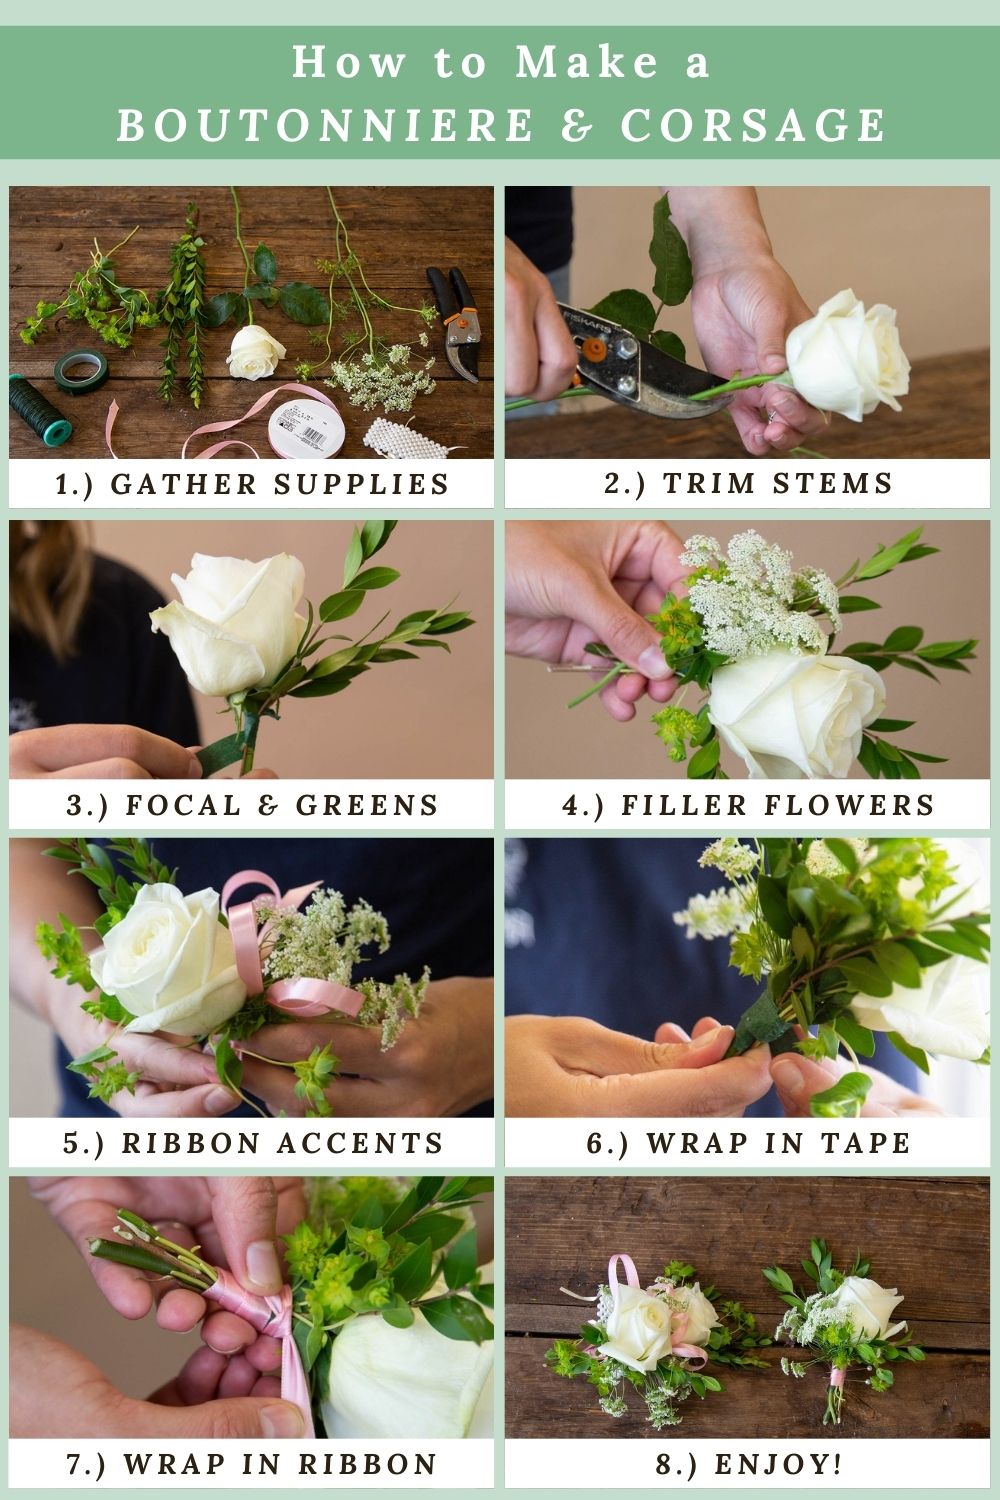 How to make a boutonniere and corsage: 1.) Gather supplies 2.) Trim stems 3.) Focal & Greens 4.) Filler Flowers 5.) Ribbon Accents 6.) Wrap in tape 7.) Wrap in ribbon 8.) Enjoy!